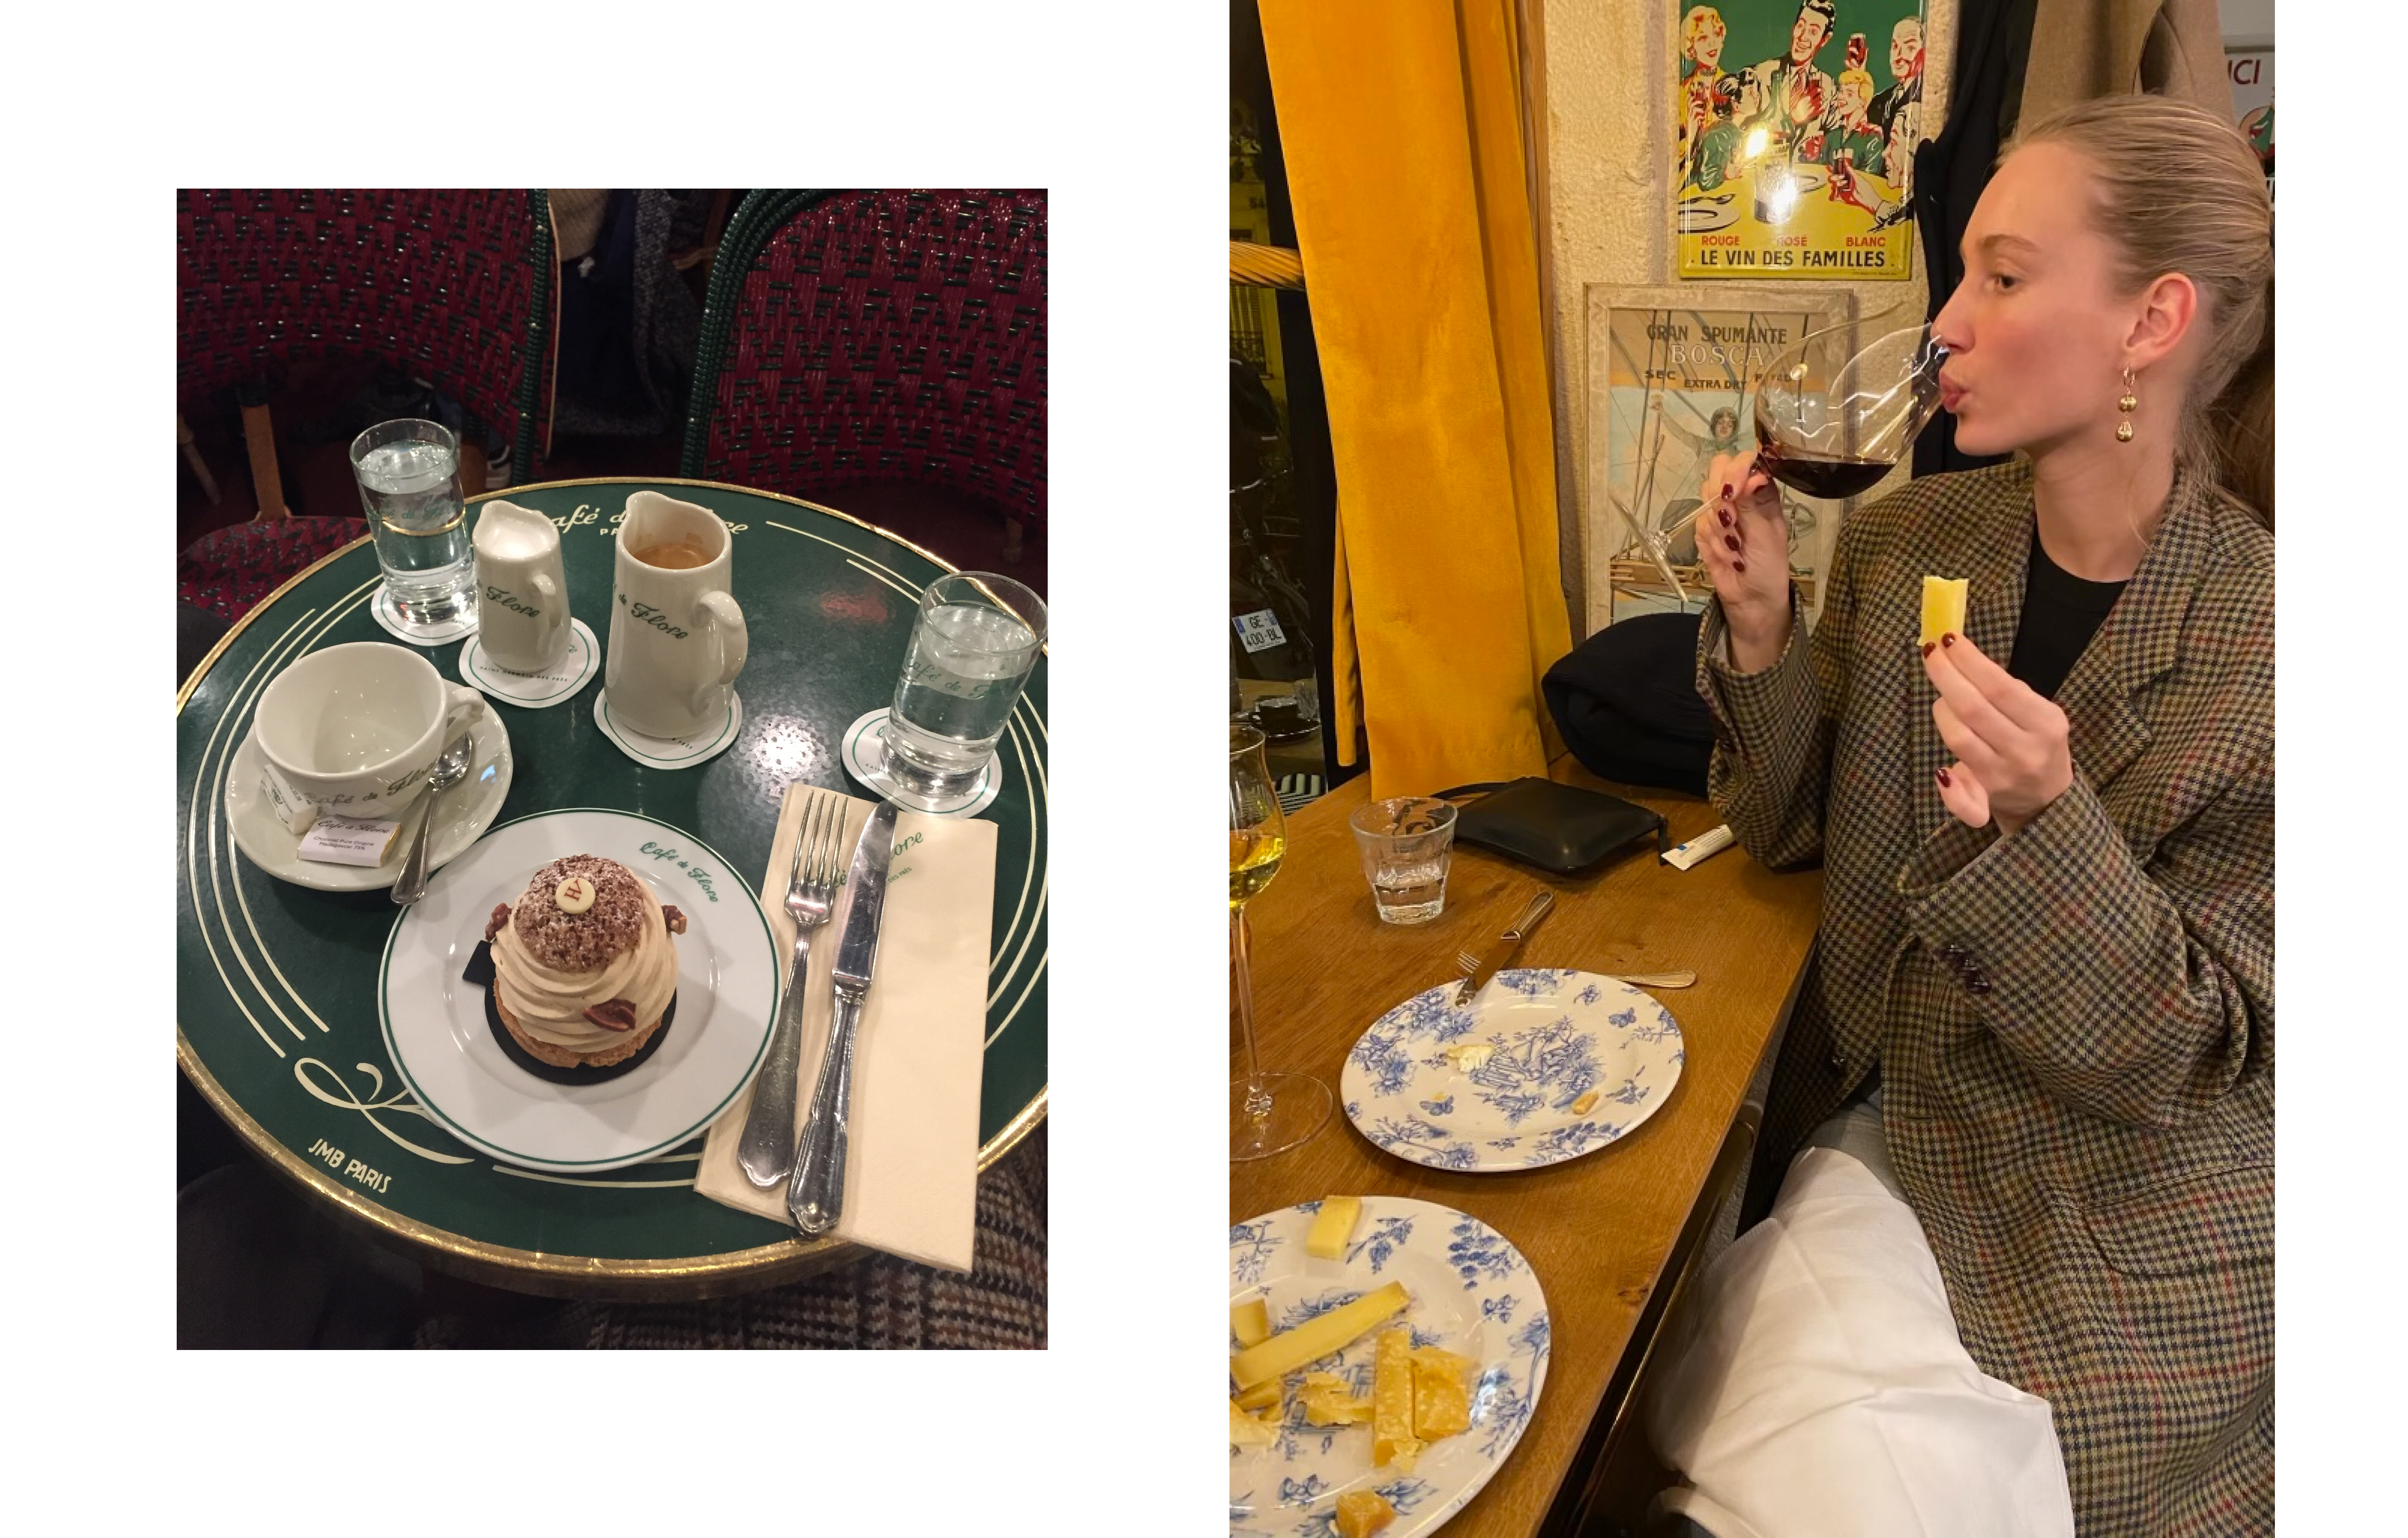 Café de Flore is always a great idea for hot choclate, coffee and maybe a sweet treat. The cheeseboard on the right is from Le Bon George